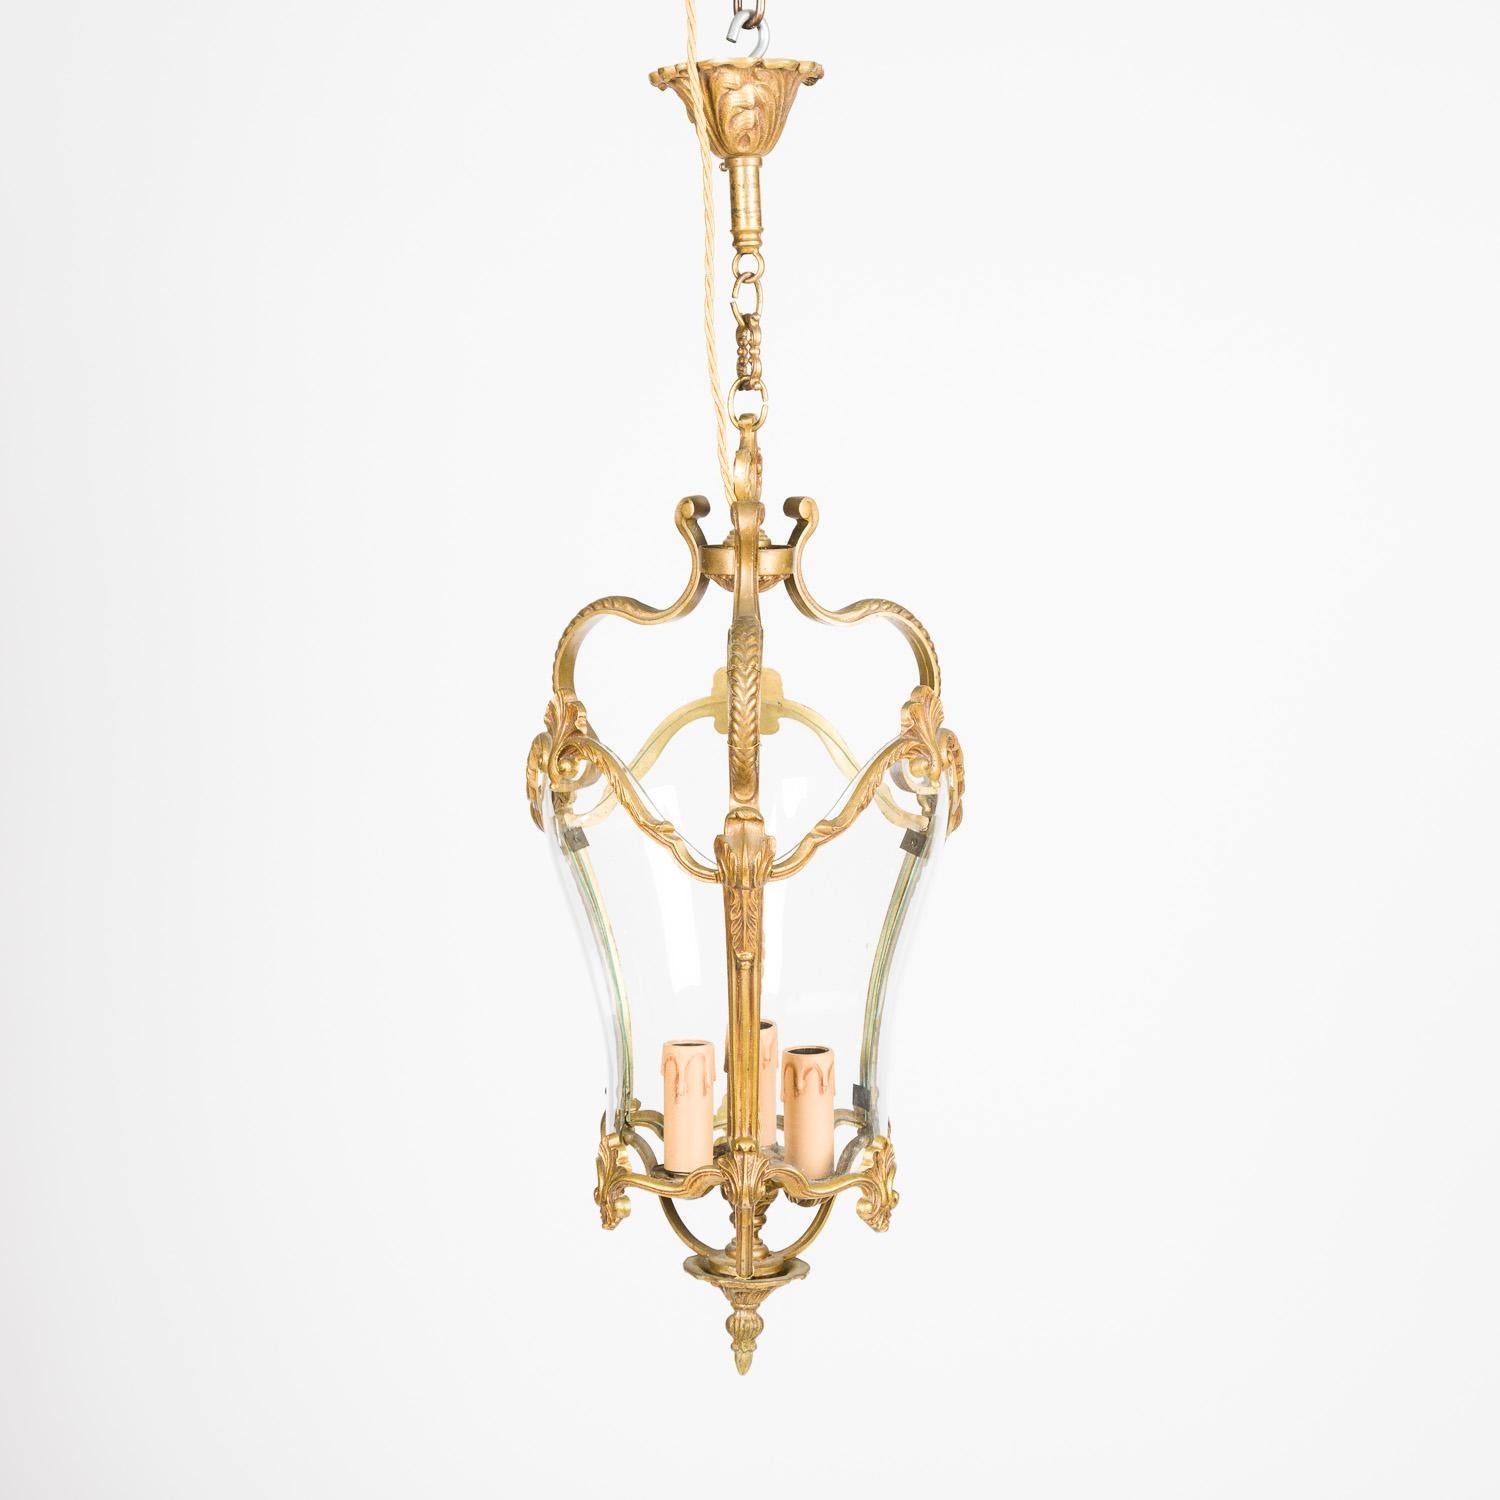 A gilt bronze bow glass glazed lantern decorated with scallop and rope twist motifs, in the Louis XV style, French, circa 1925.

With 3 internal light fittings, ceiling rose and chain.

Re-wired and tested.

Height of lantern: 20.5 inches - 52